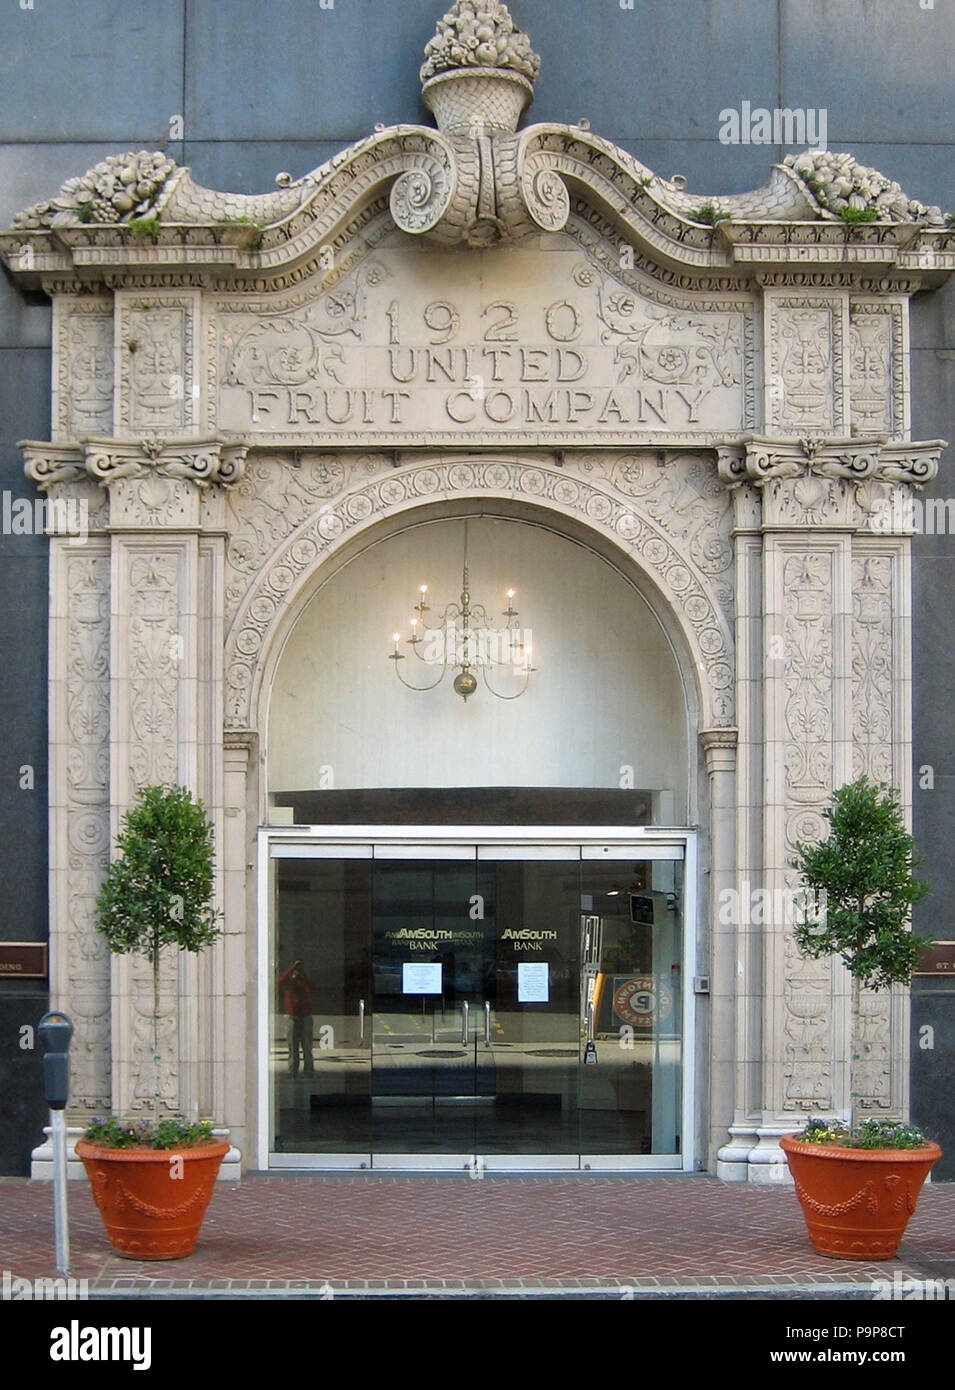 . English: Entrance to old w:United Fruit Company building, St. Charles Avenue, New Orleans. Now houses a bank. 39 1920UnitedFruitCompanyEntrance Stock Photo